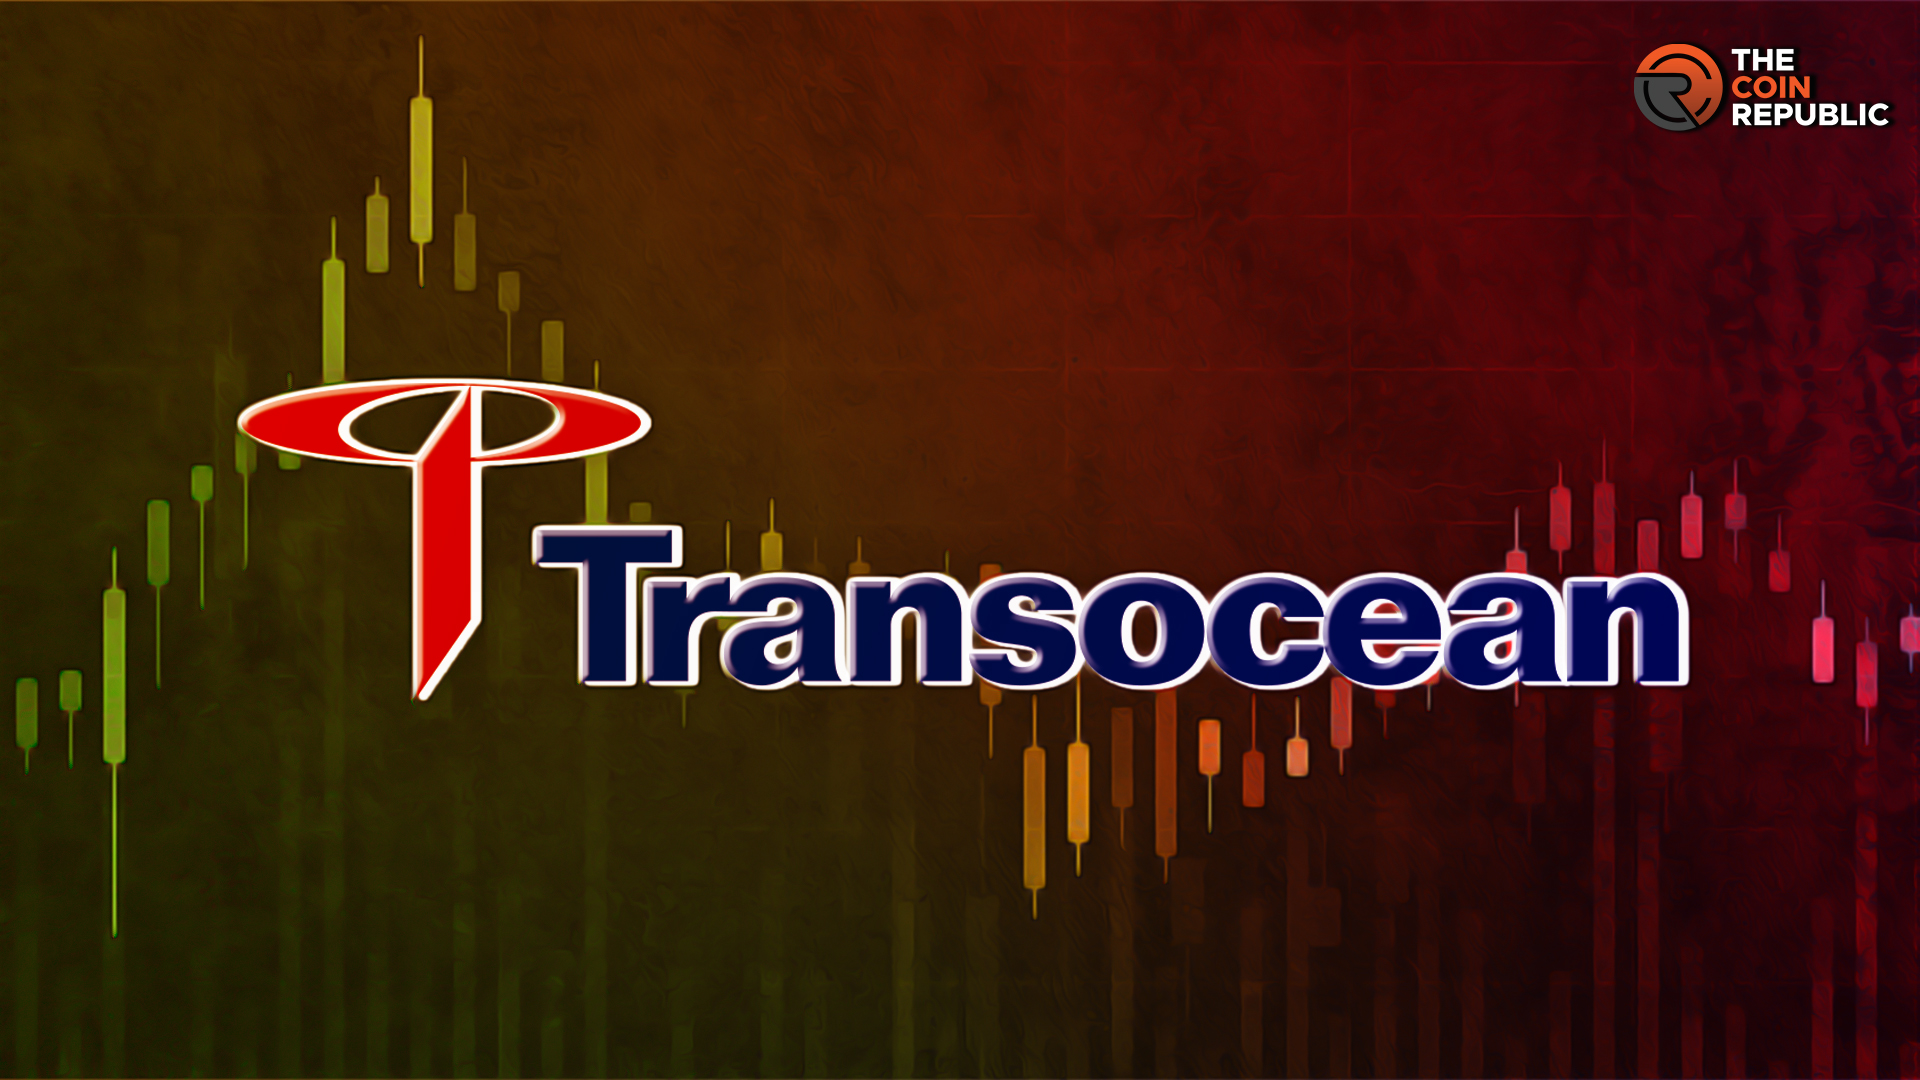 Transocean Stock Analysis: RIG Stock Preparing For A Big Rally